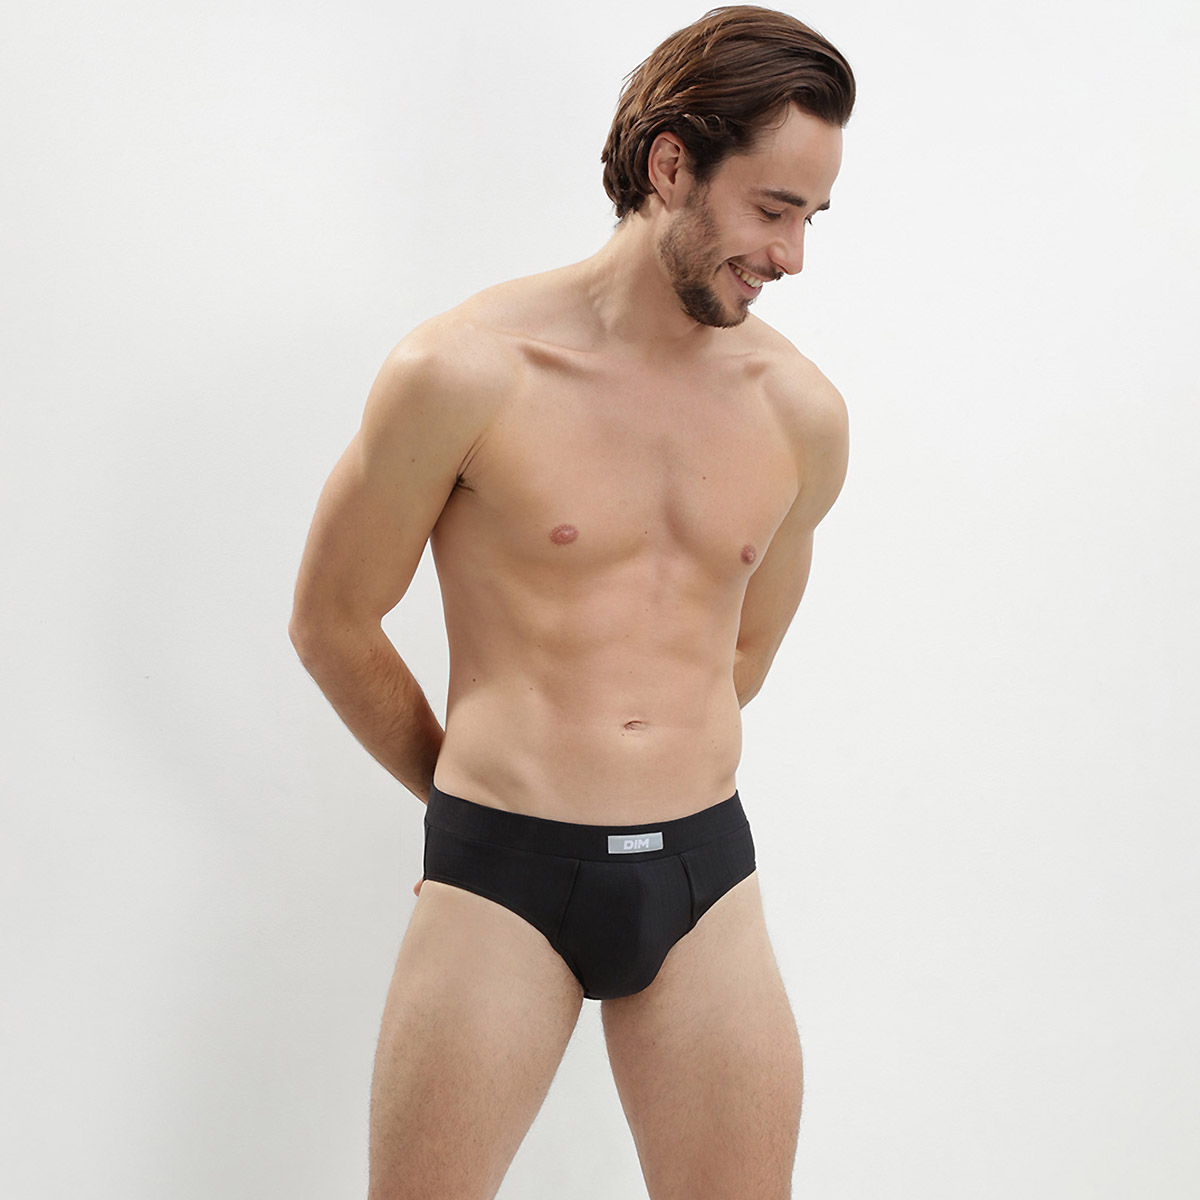 Smart underwear' is here, and it's ridiculous